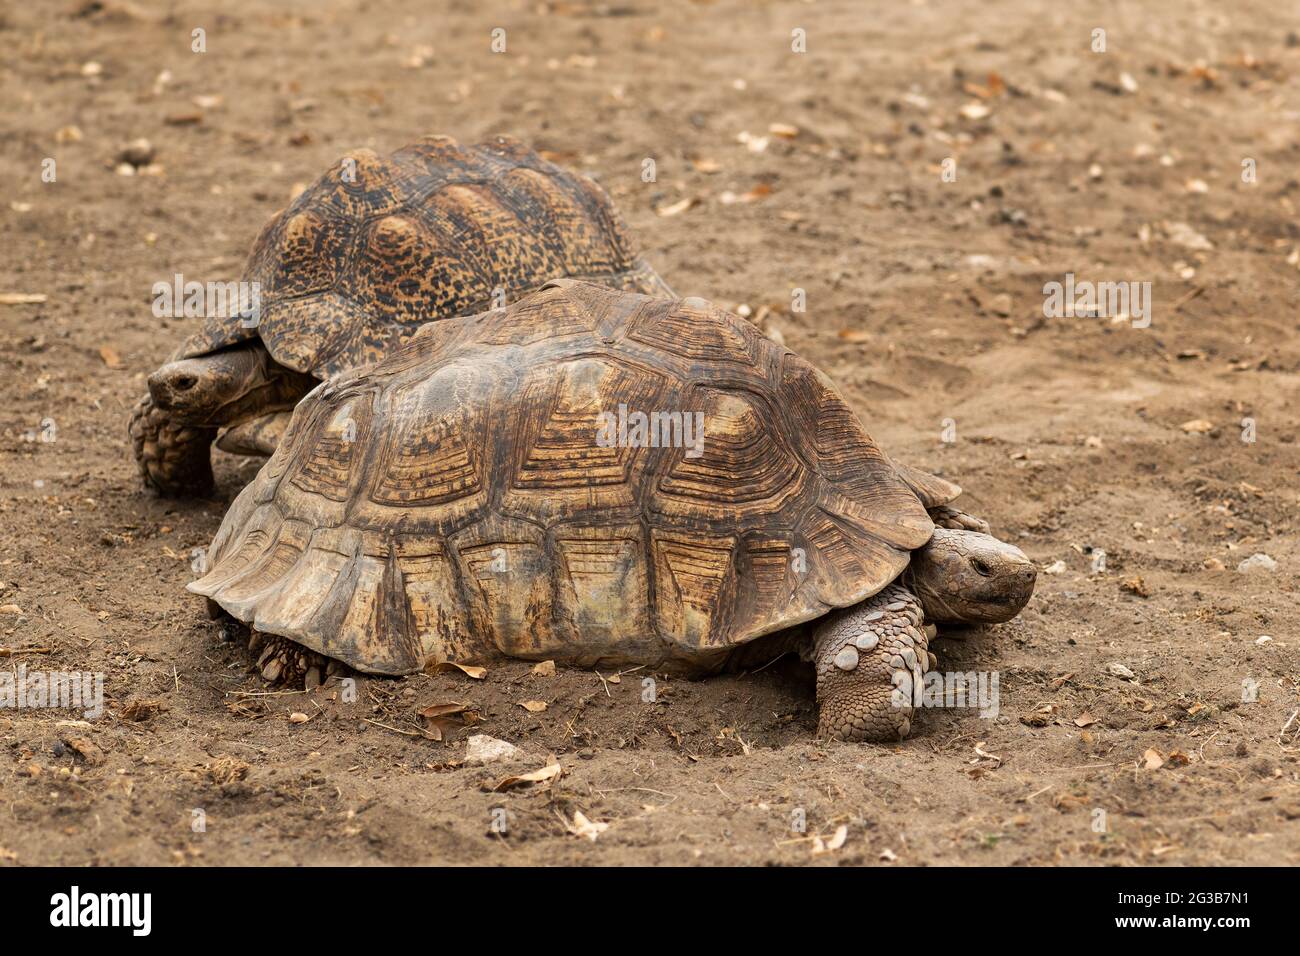 African Spurred Tortoise - Centrochelys sulcata, large tortoise from African bushes, woodlands and grasslands, lake Langano, Ethiopia. Stock Photo